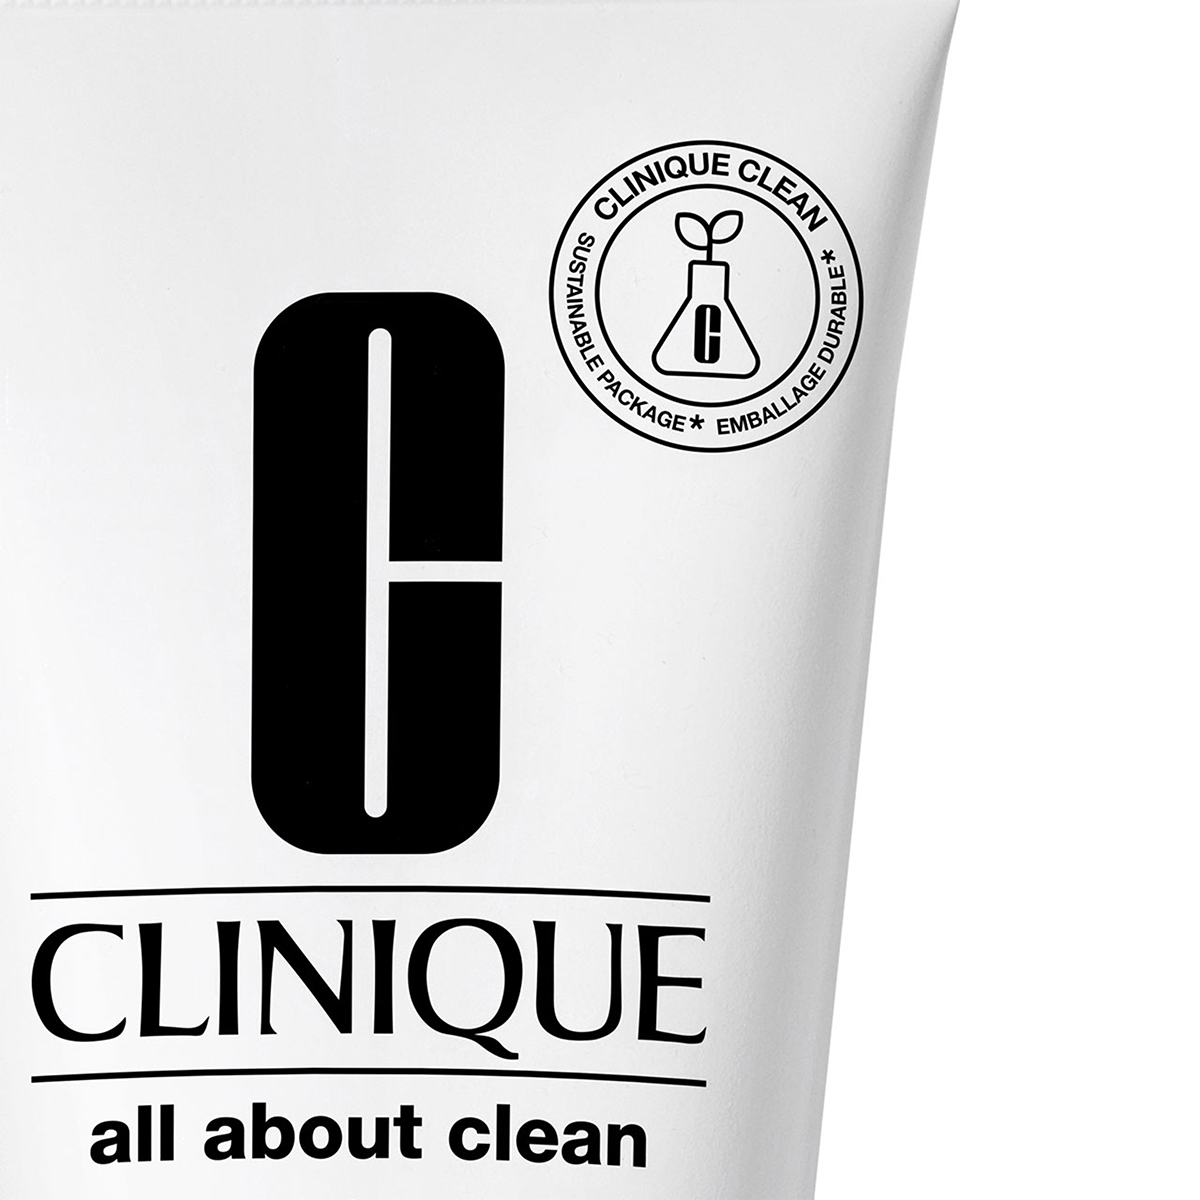 Clinique All About Clean(tm) 2-in-1 Cleanser And Exfoliating Jelly